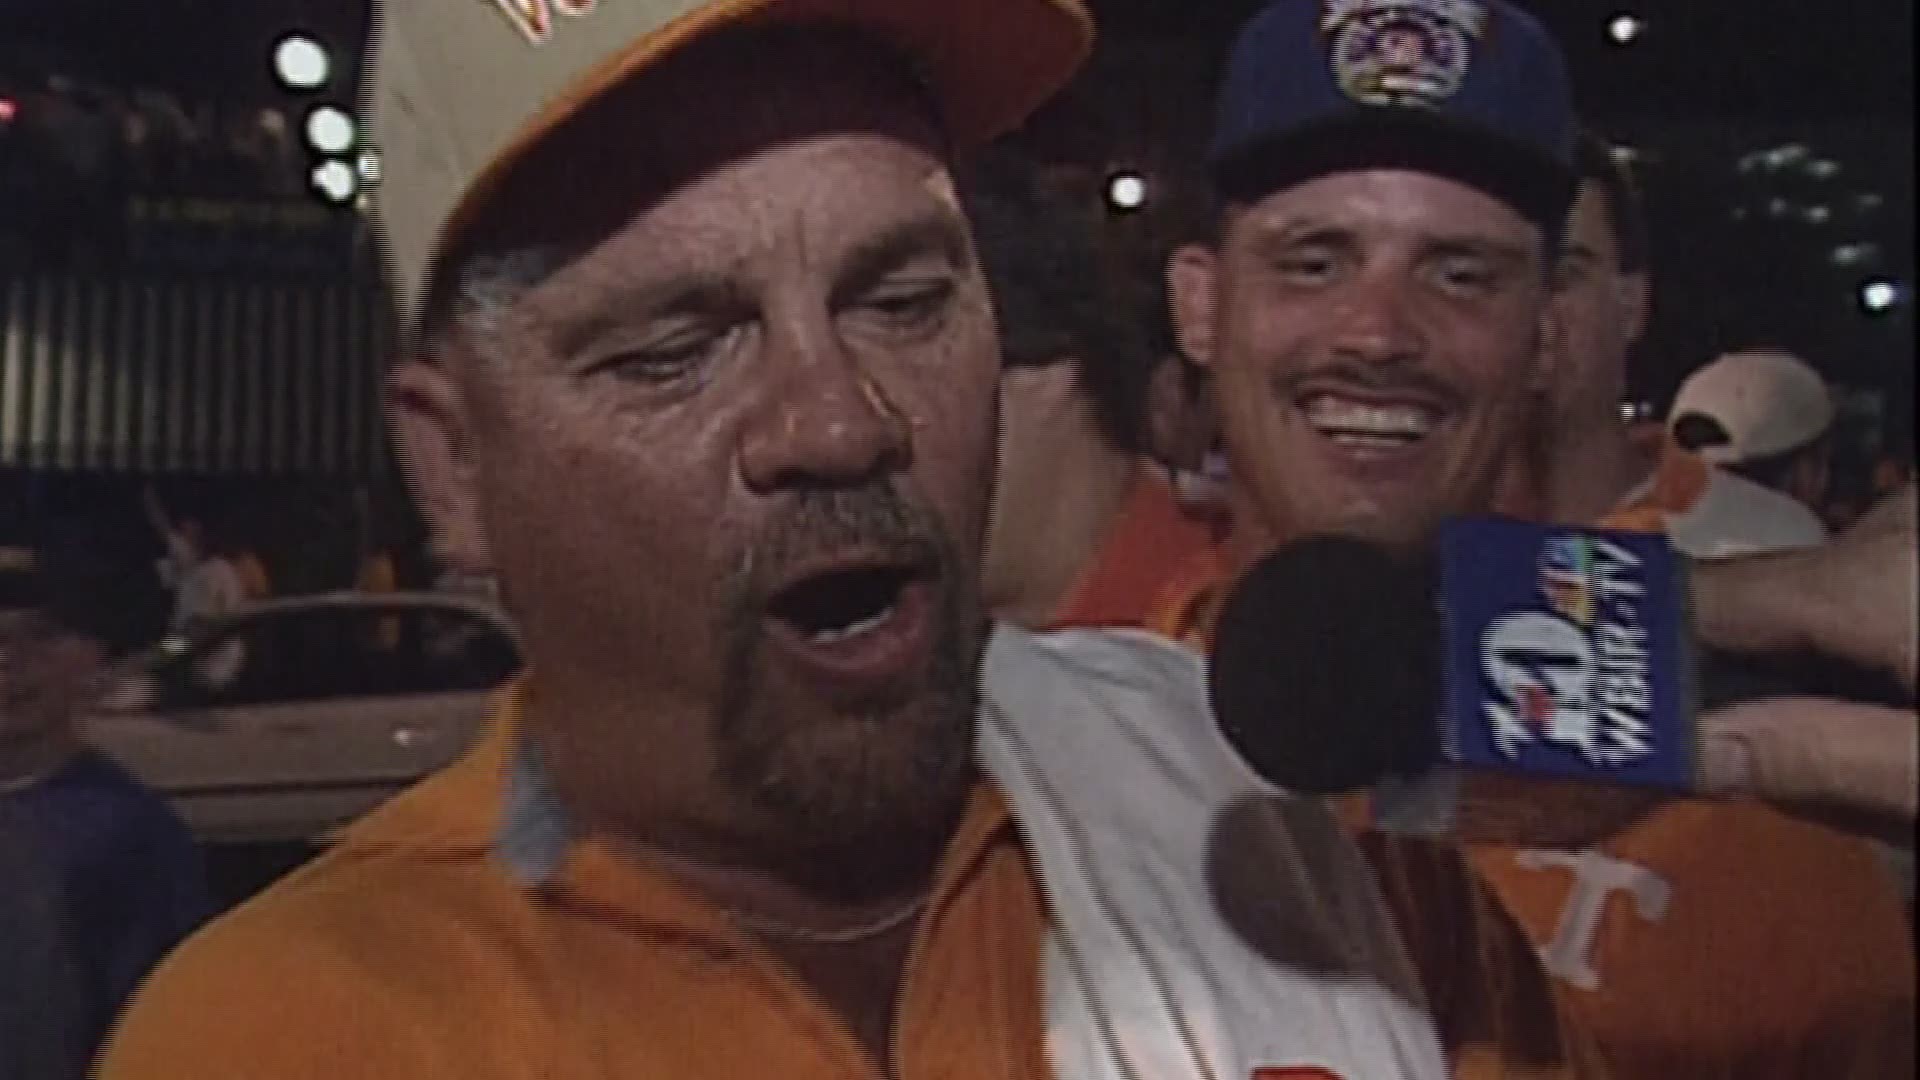 Relive the pandemonium of the celebration after Tennessee's 20-17 overtime win over Florida in 1998. What happened after the fans tore down the goal posts?